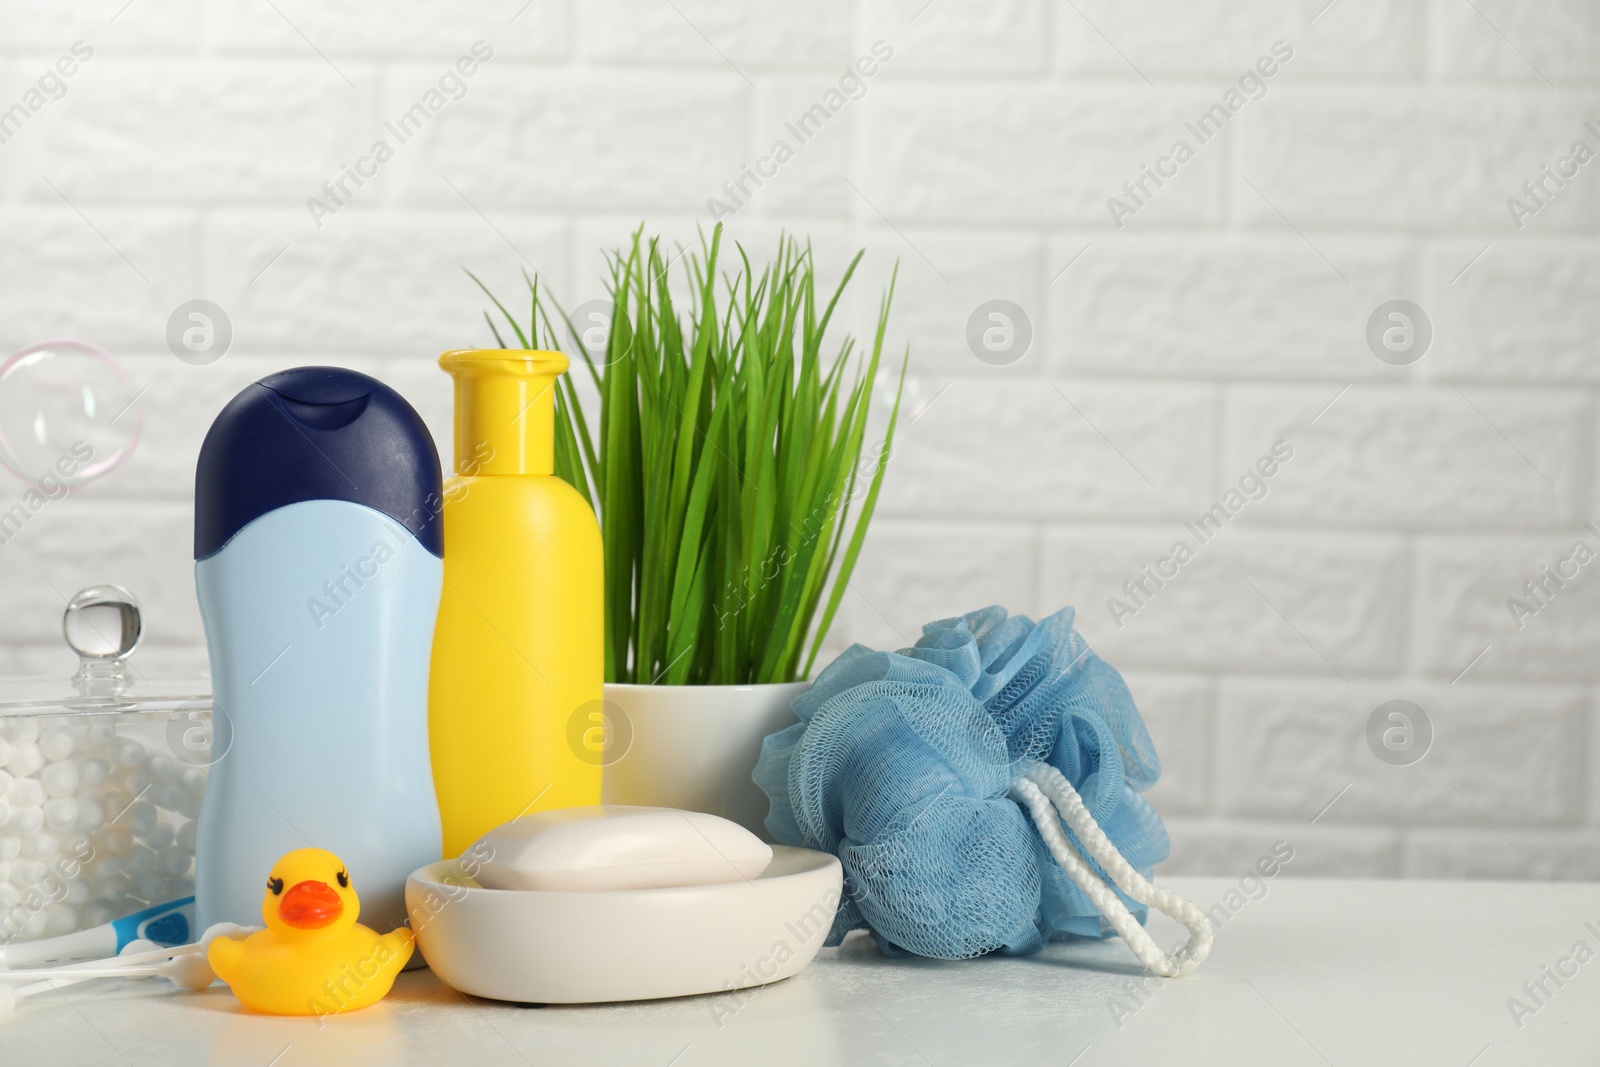 Photo of Different baby bath accessories and cosmetic products on white table against brick wall